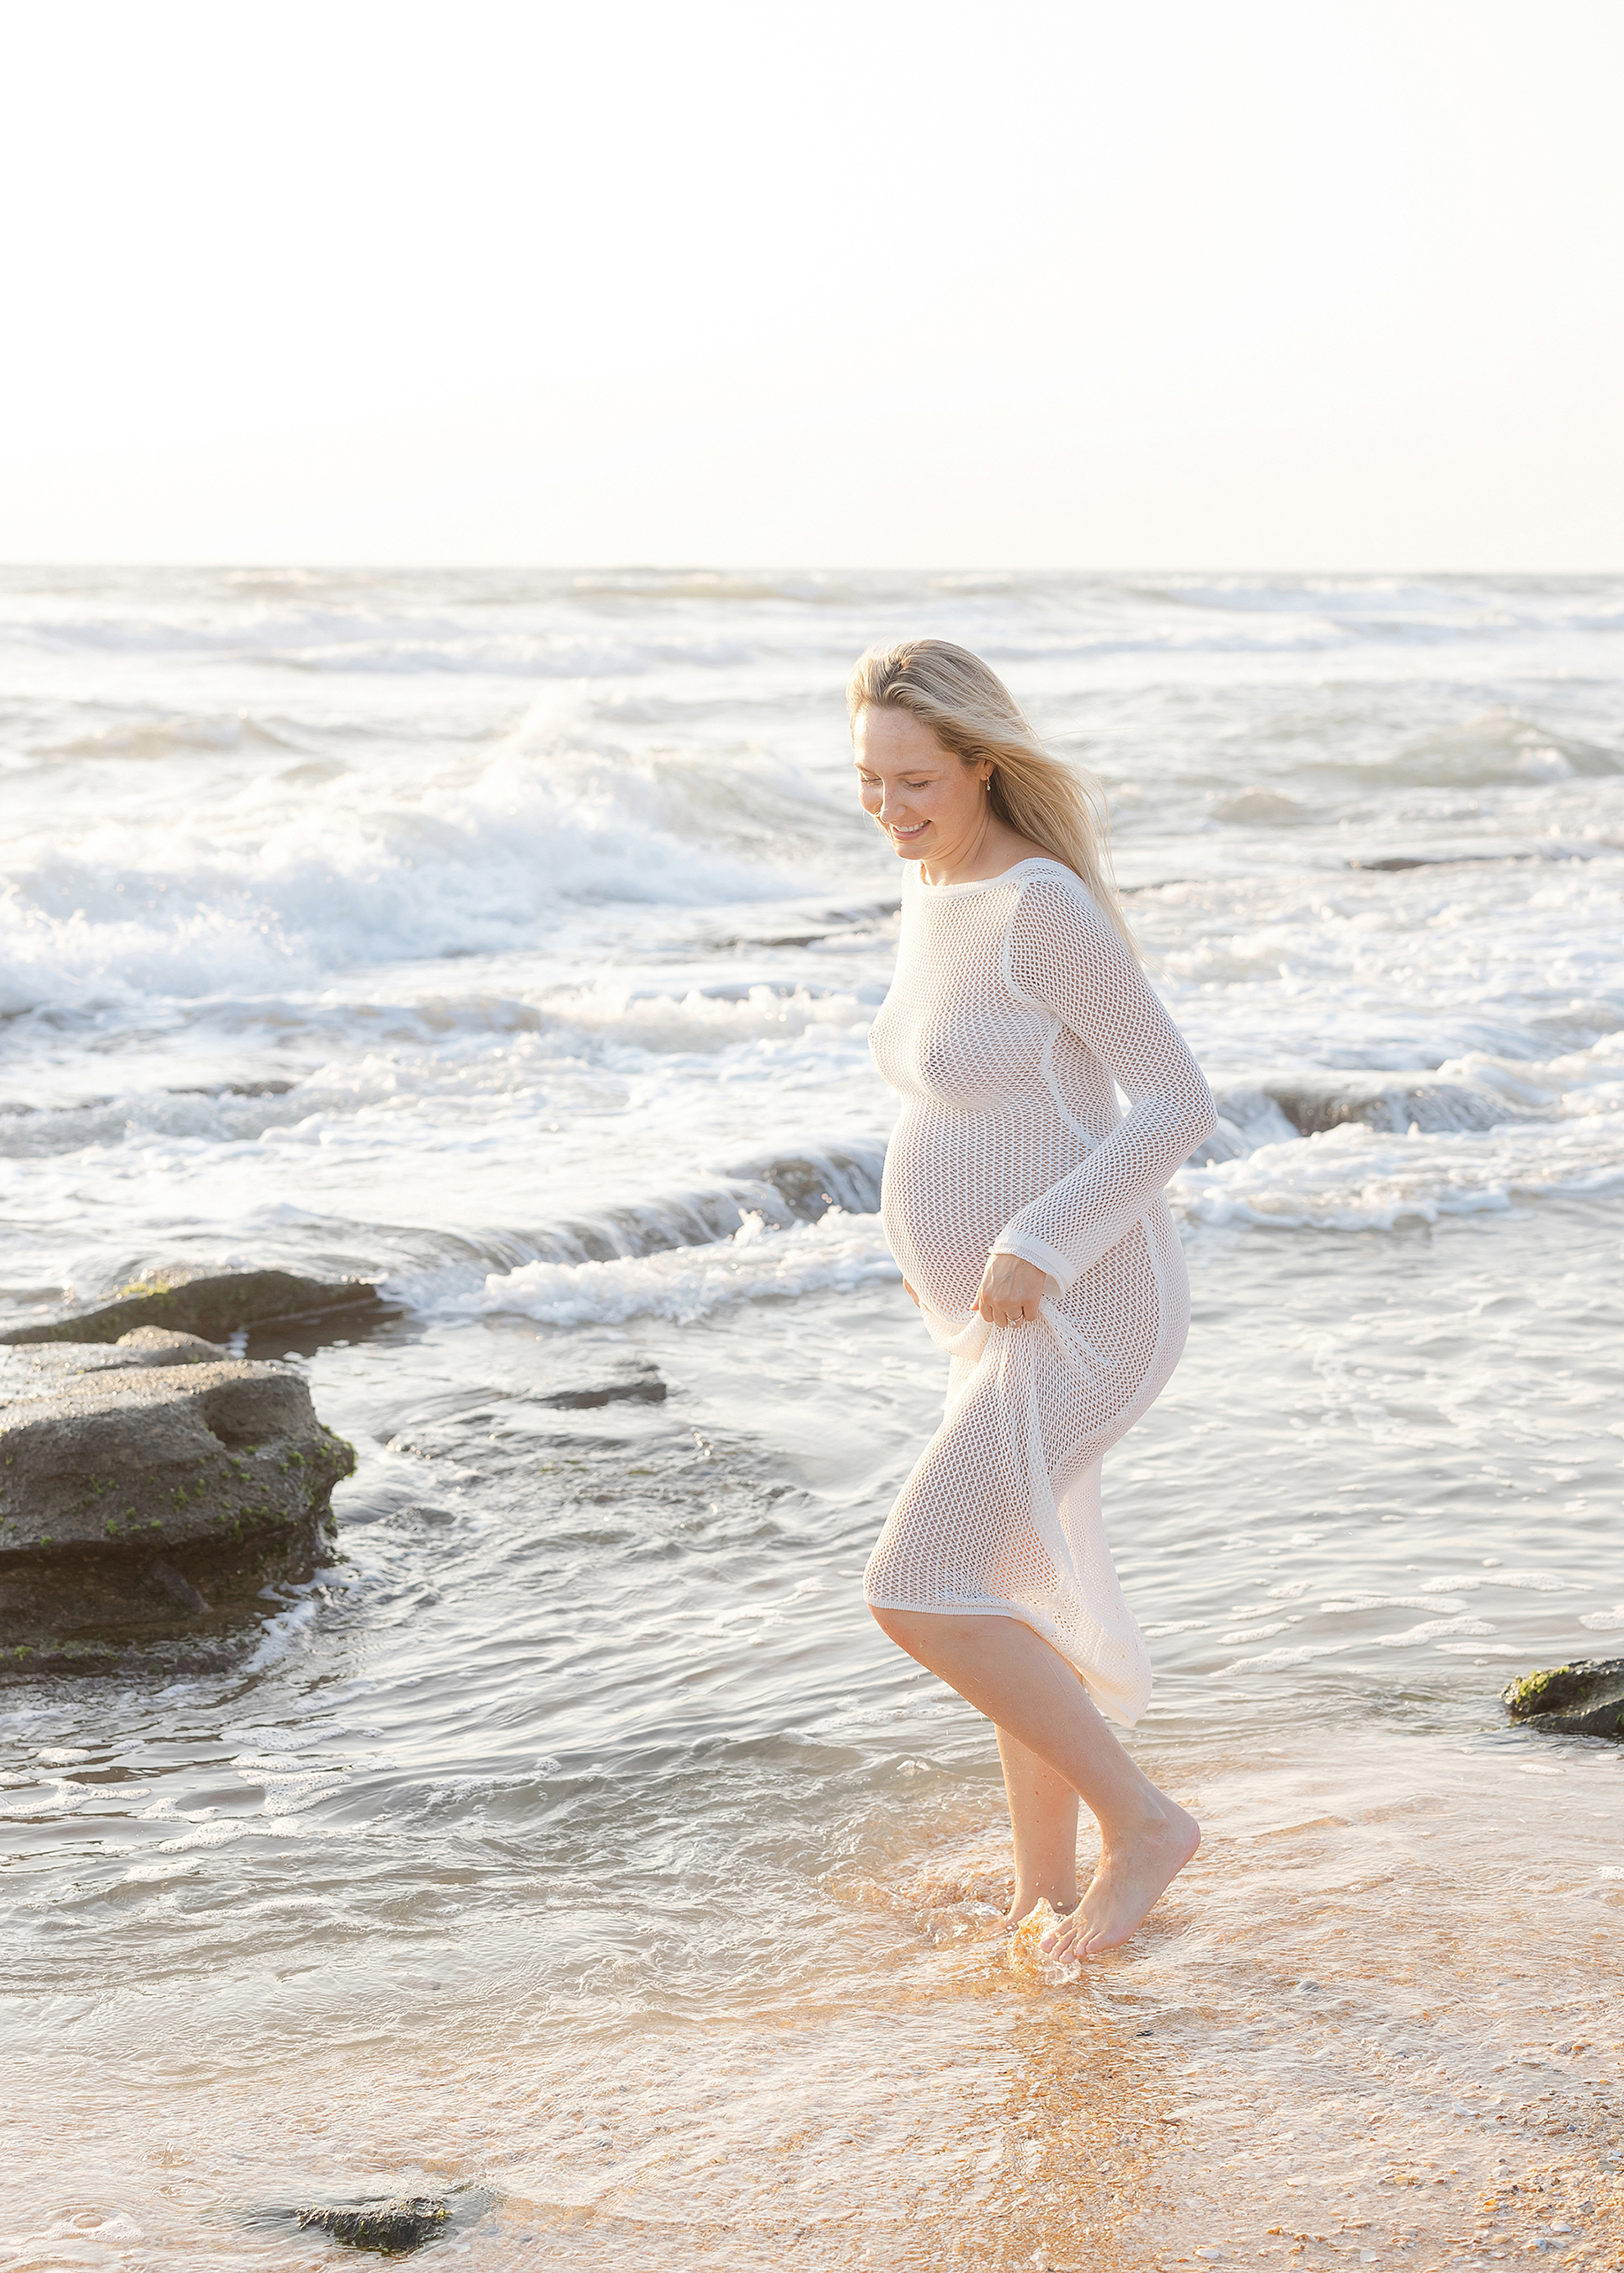 Pregnancy portrait on the beach at sunrise with a white fishnet dress.